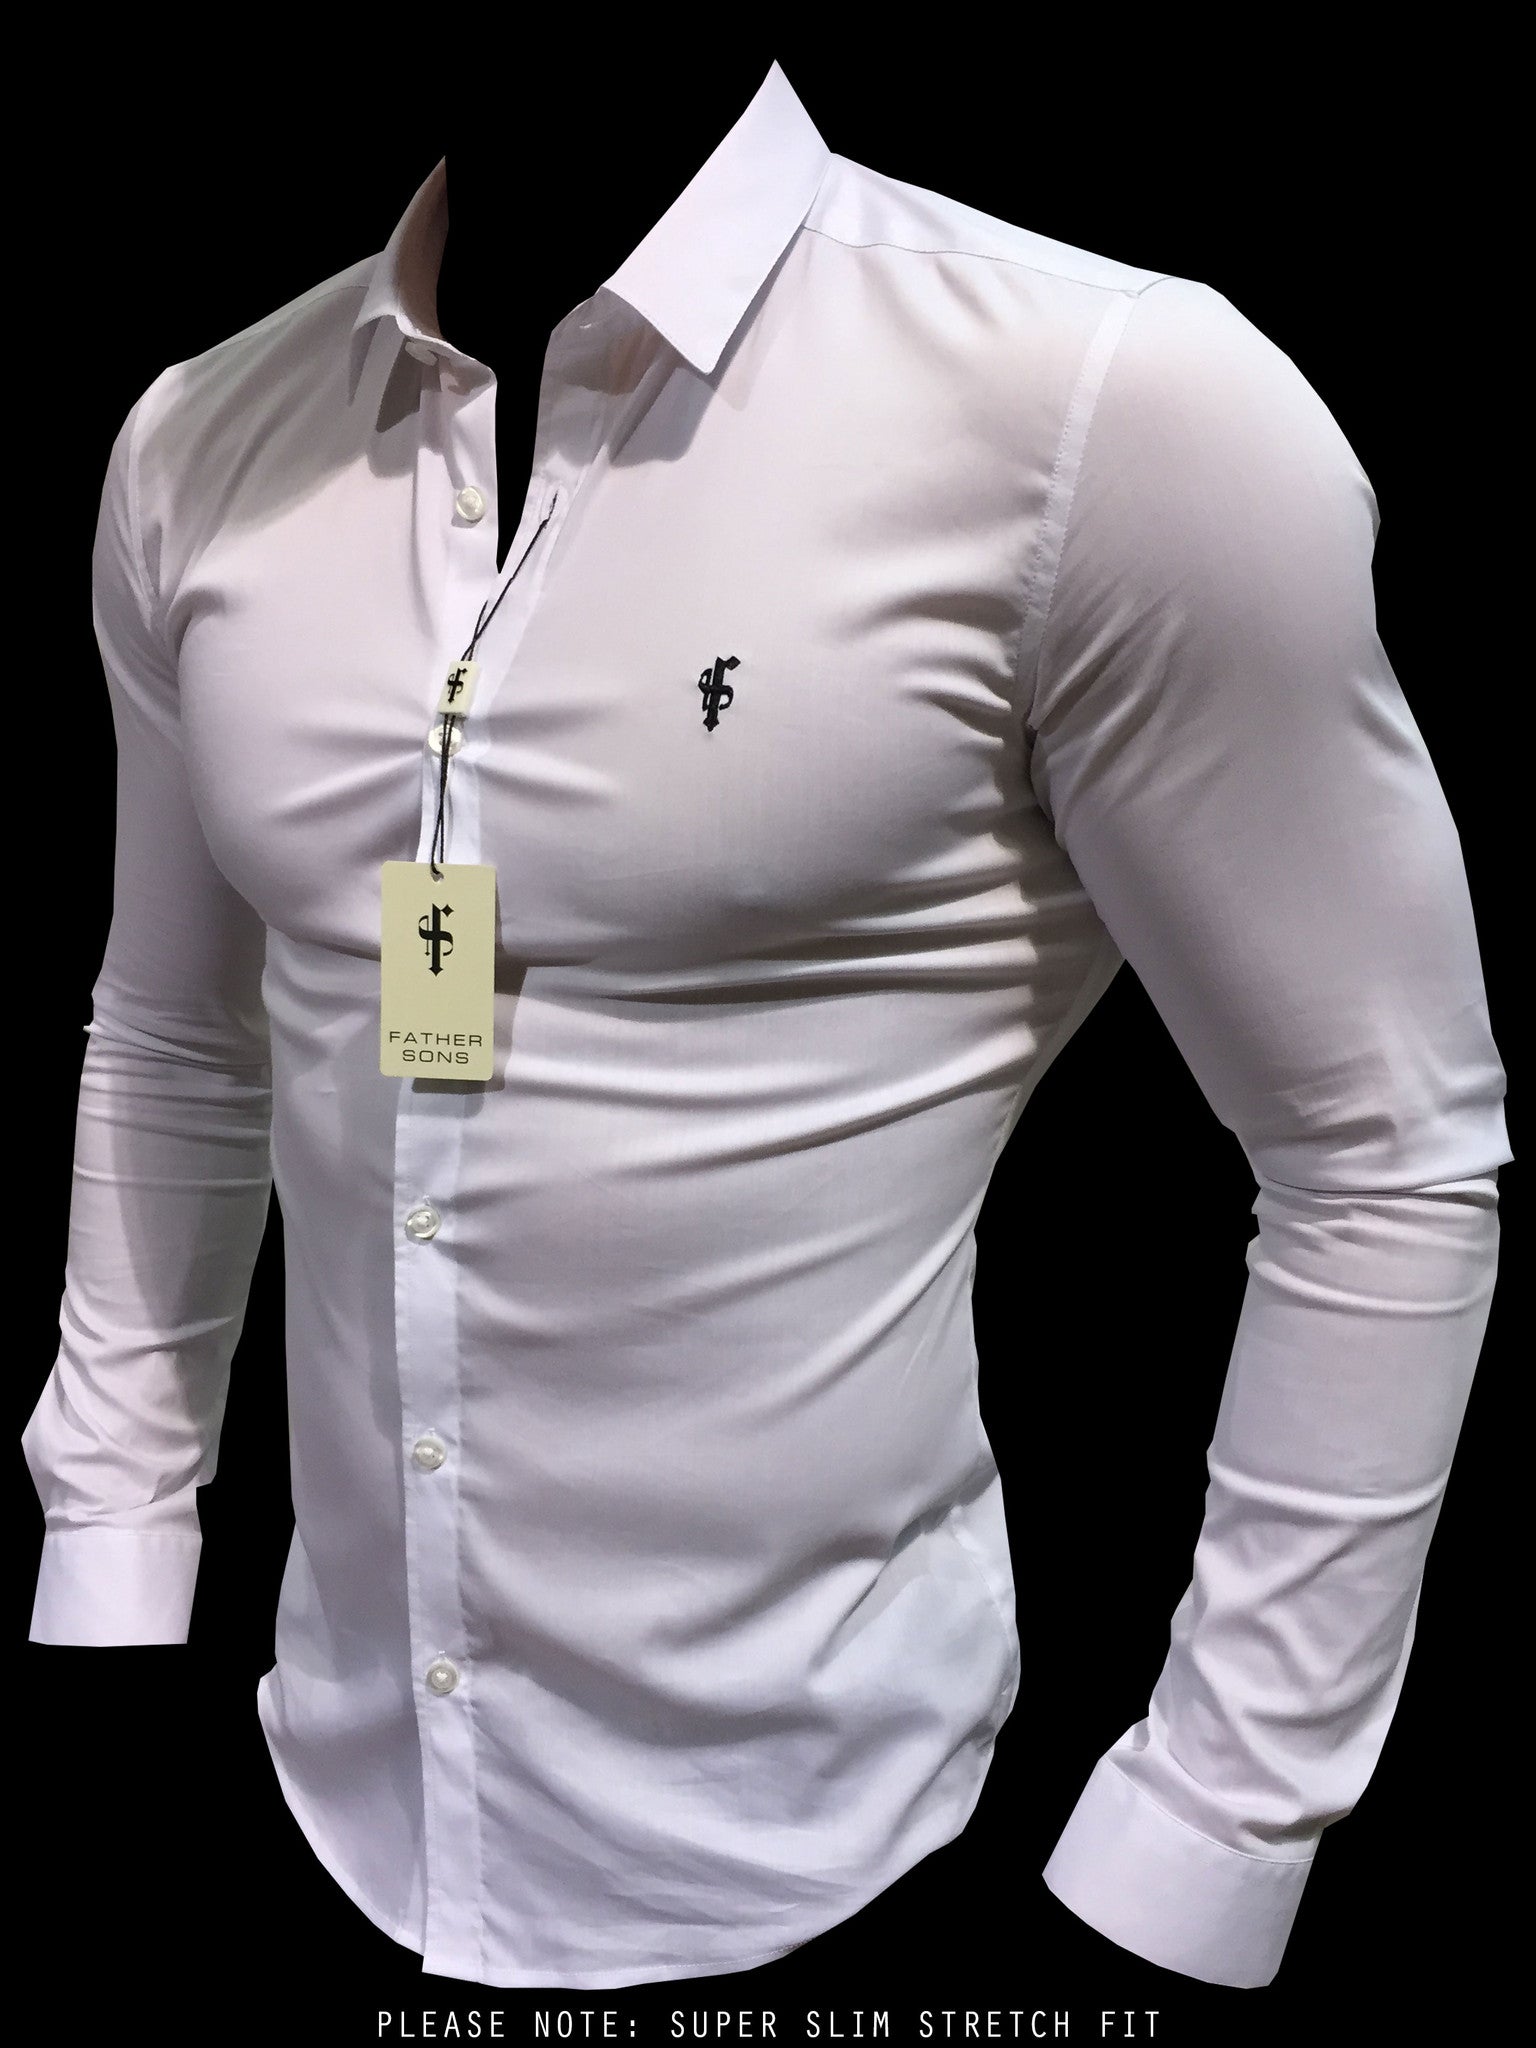 muscle fit shirts brand